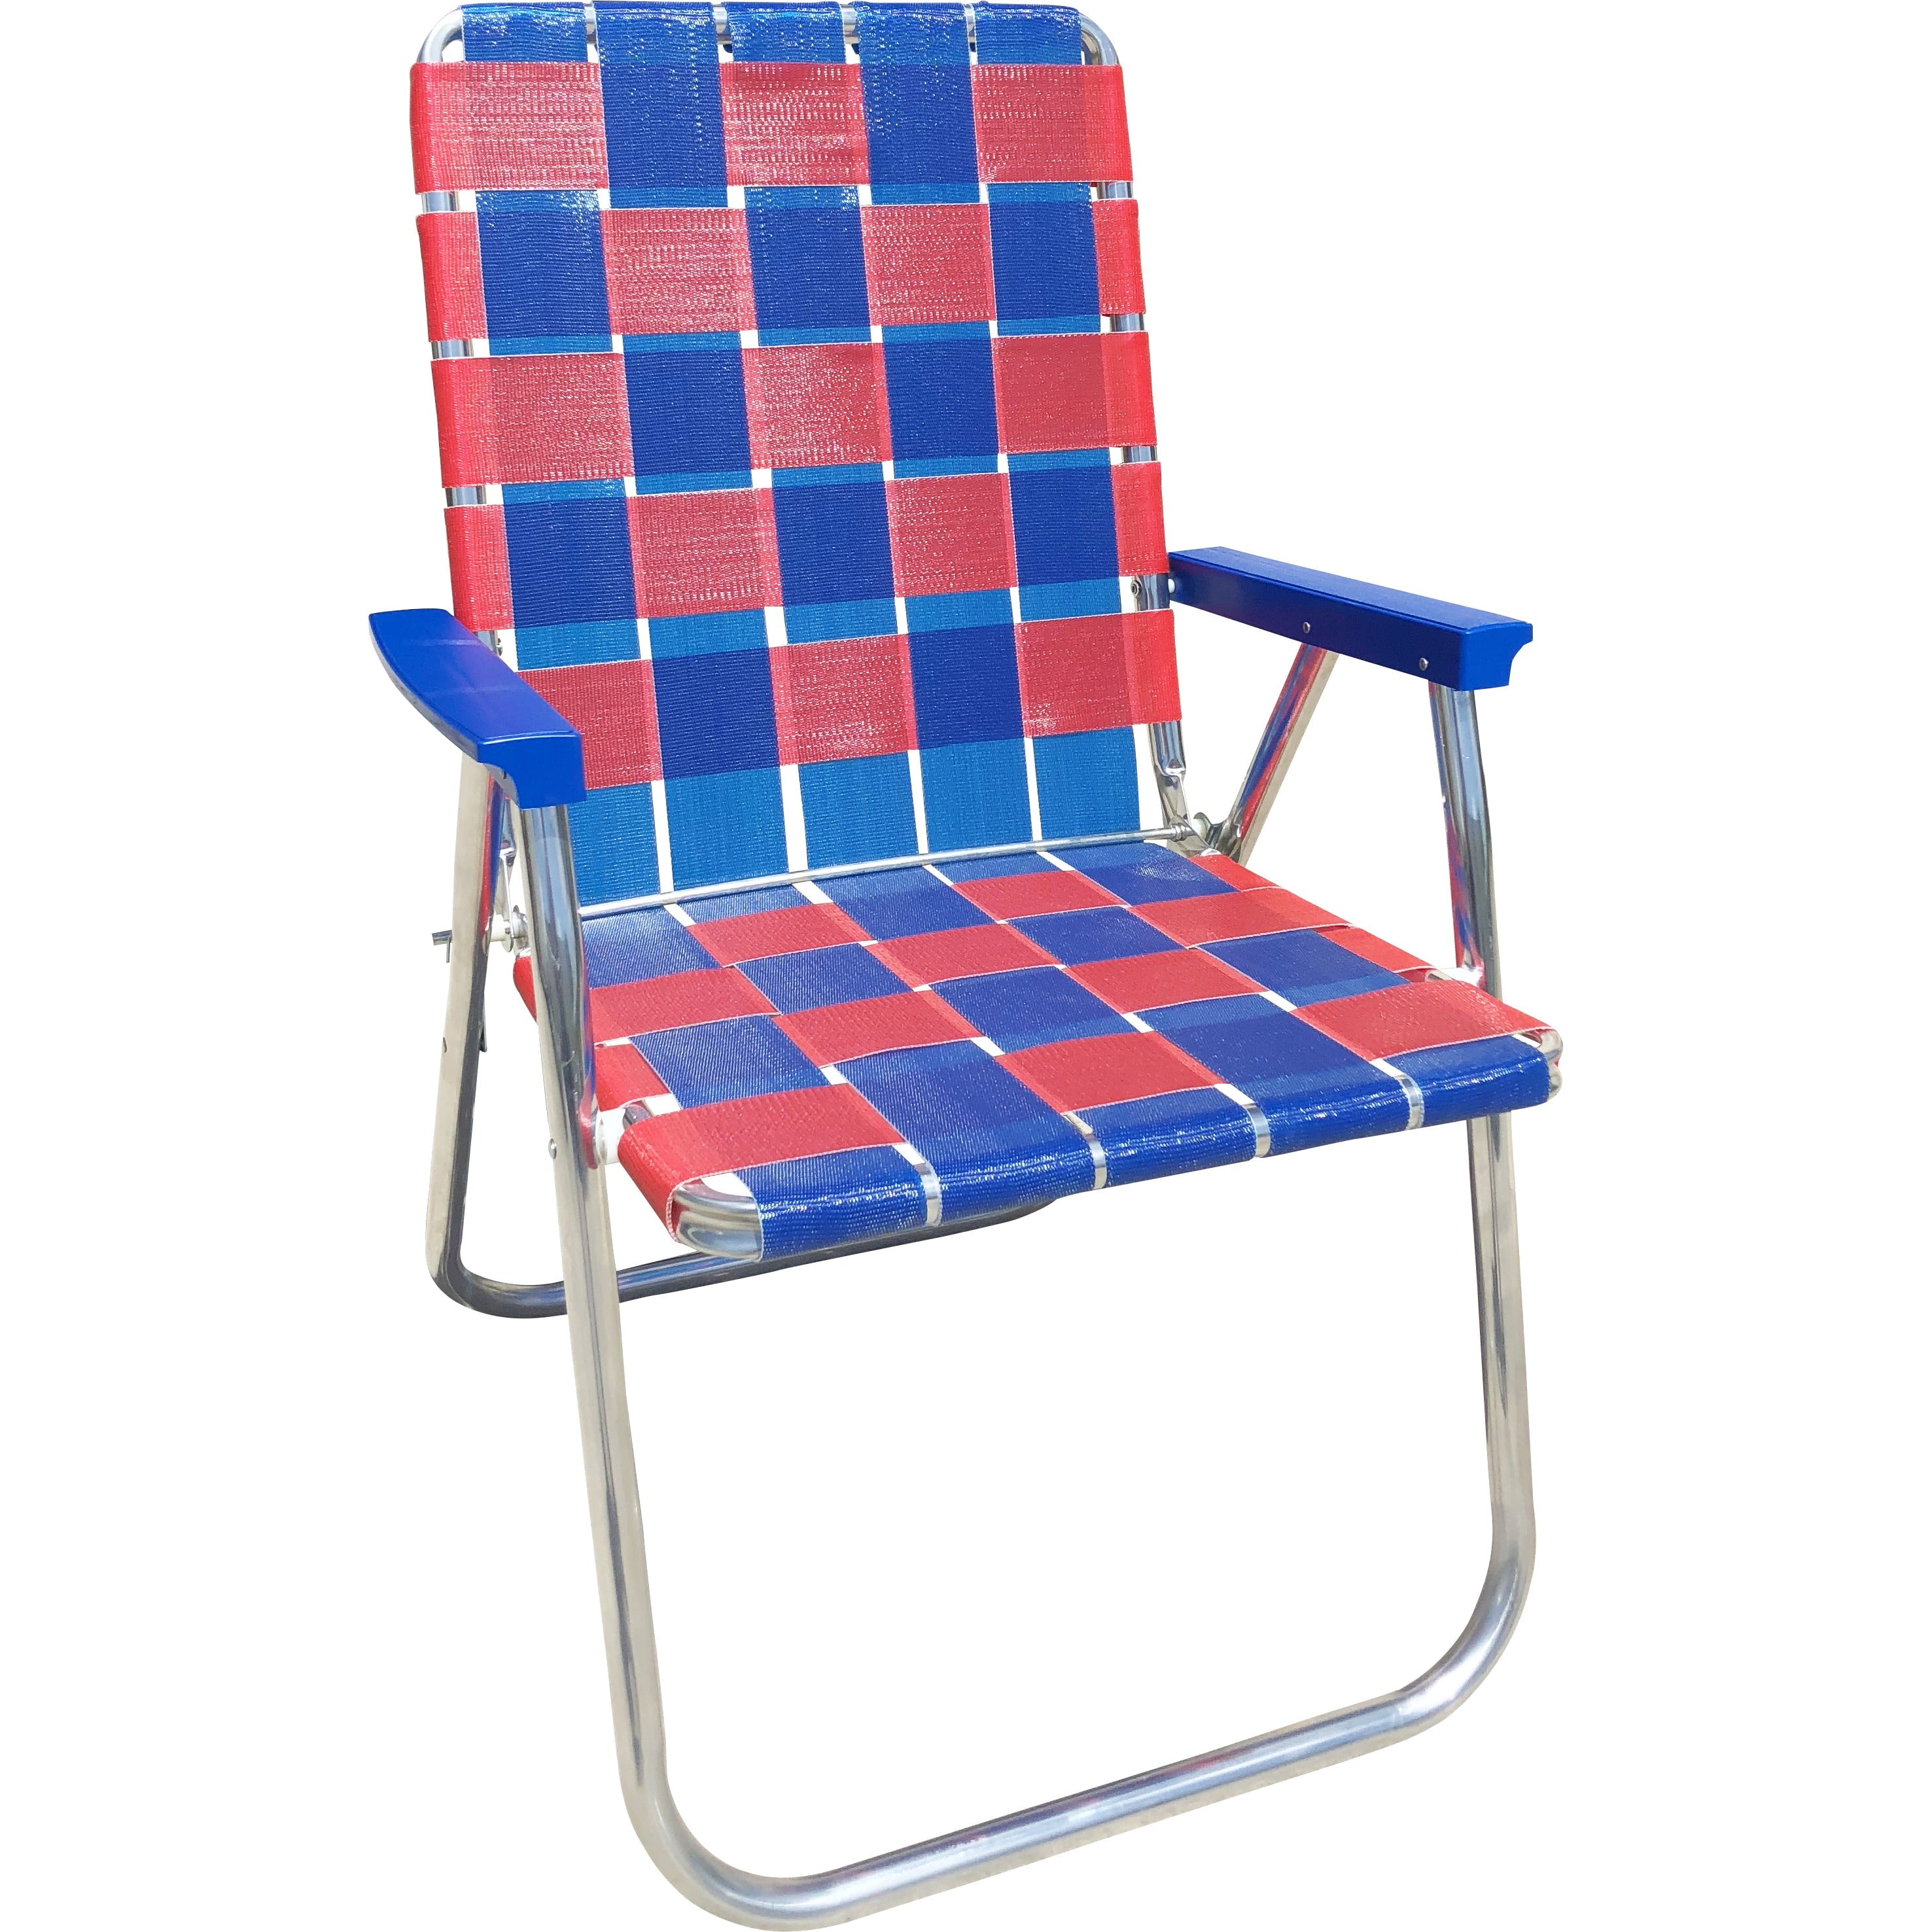 Lawn Chair USA American Made Folding Aluminum Webbing Chair for Adult and Children | Blue / Red - image 1 of 7